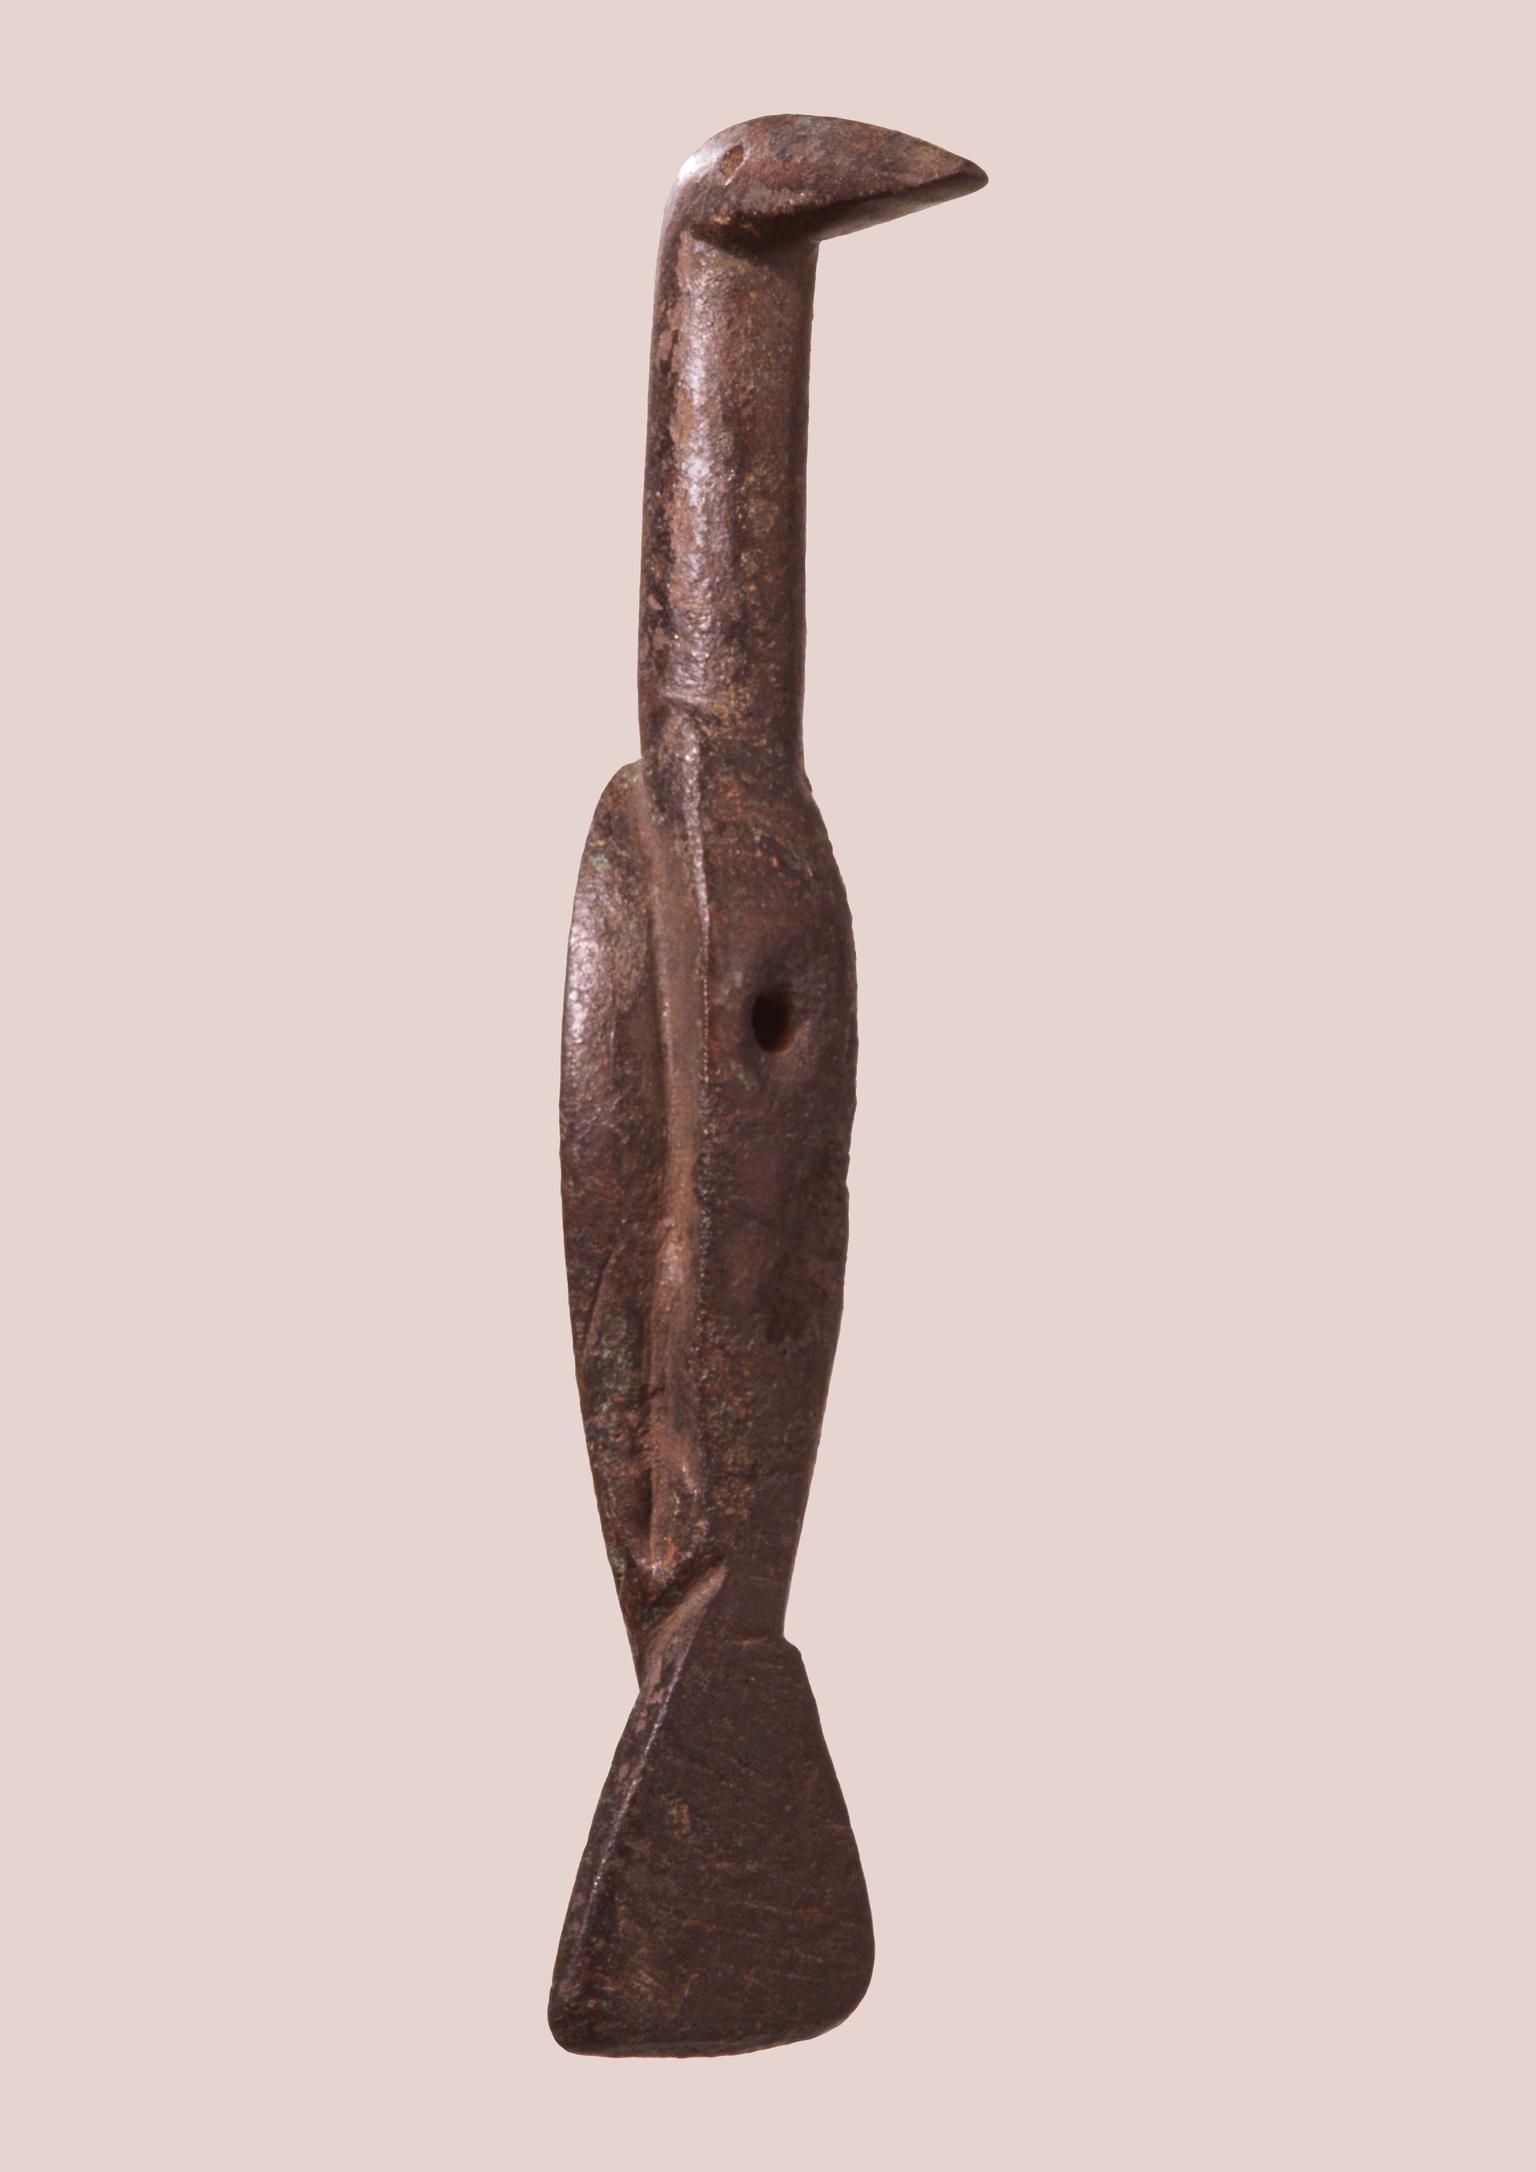 Early Medieval copper alloy mount